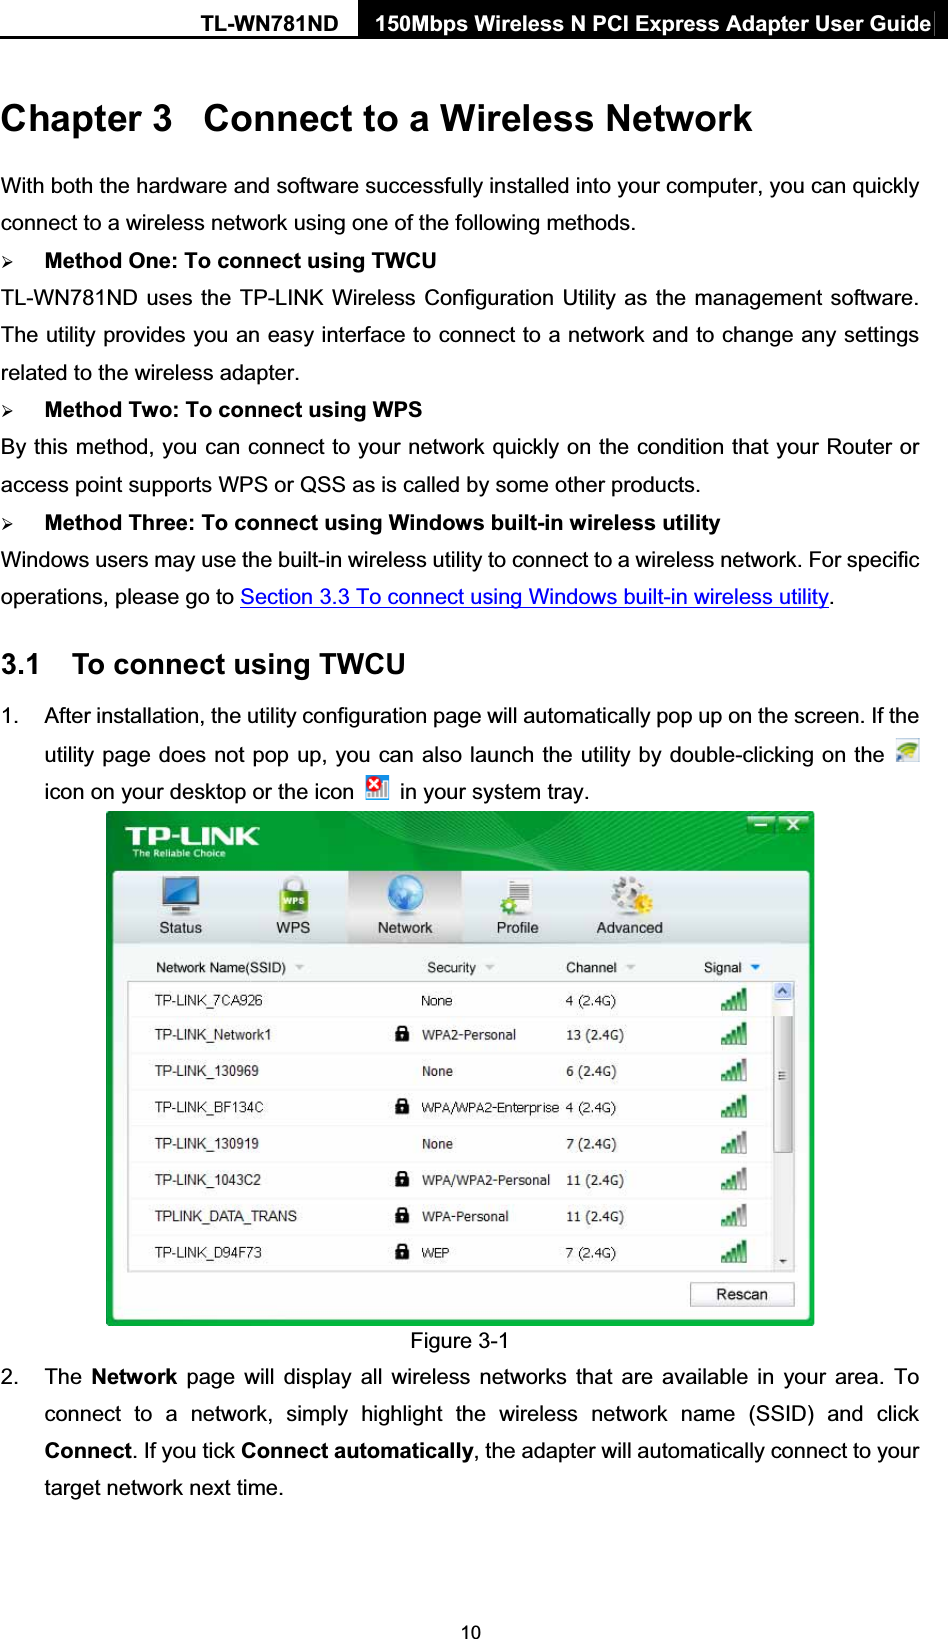 TL-WN781ND  150Mbps Wireless N PCI Express Adapter User Guide  10Chapter 3  Connect to a Wireless Network With both the hardware and software successfully installed into your computer, you can quickly connect to a wireless network using one of the following methods. ¾ Method One: To connect using TWCU TL-WN781ND uses the TP-LINK Wireless Configuration Utility as the management software. The utility provides you an easy interface to connect to a network and to change any settings related to the wireless adapter.   ¾ Method Two: To connect using WPS By this method, you can connect to your network quickly on the condition that your Router or access point supports WPS or QSS as is called by some other products.   ¾ Method Three: To connect using Windows built-in wireless utility Windows users may use the built-in wireless utility to connect to a wireless network. For specific operations, please go to Section 3.3 To connect using Windows built-in wireless utility. 3.1  To connect using TWCU 1.  After installation, the utility configuration page will automatically pop up on the screen. If the utility page does not pop up, you can also launch the utility by double-clicking on the   icon on your desktop or the icon    in your system tray.    Figure 3-1 2. The Network page will display all wireless networks that are available in your area. To connect to a network, simply highlight the wireless network name (SSID) and click Connect. If you tick Connect automatically, the adapter will automatically connect to your target network next time. 